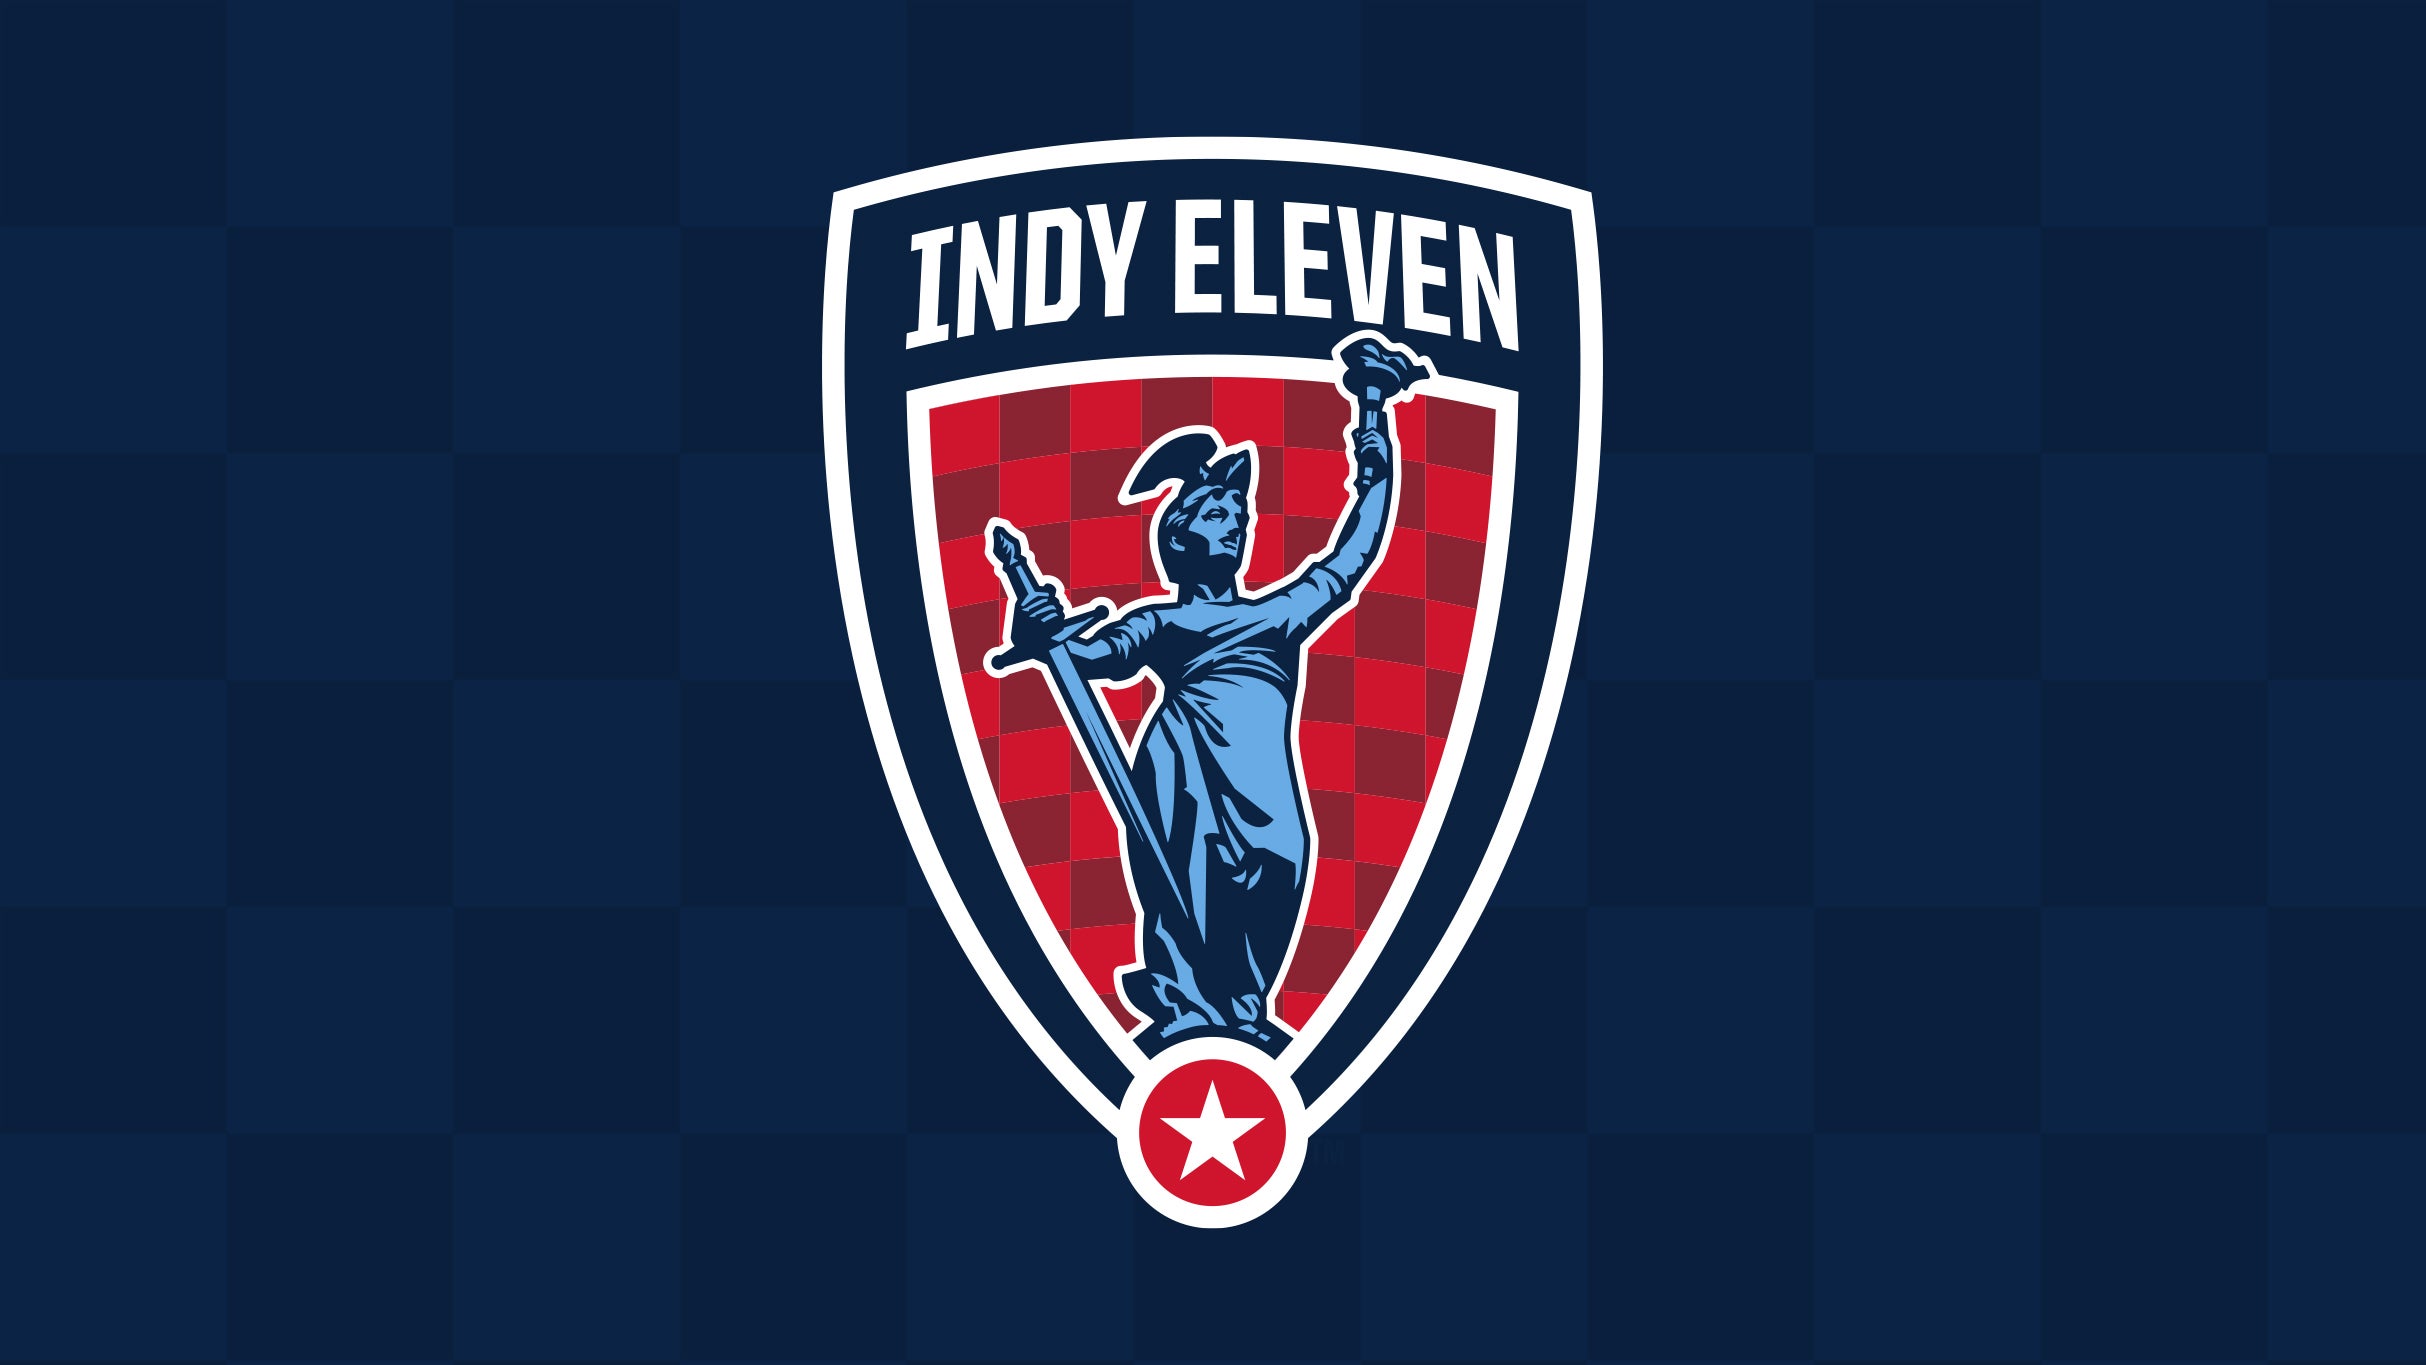 Indy Eleven vs. New Mexico United at Carroll Stadium